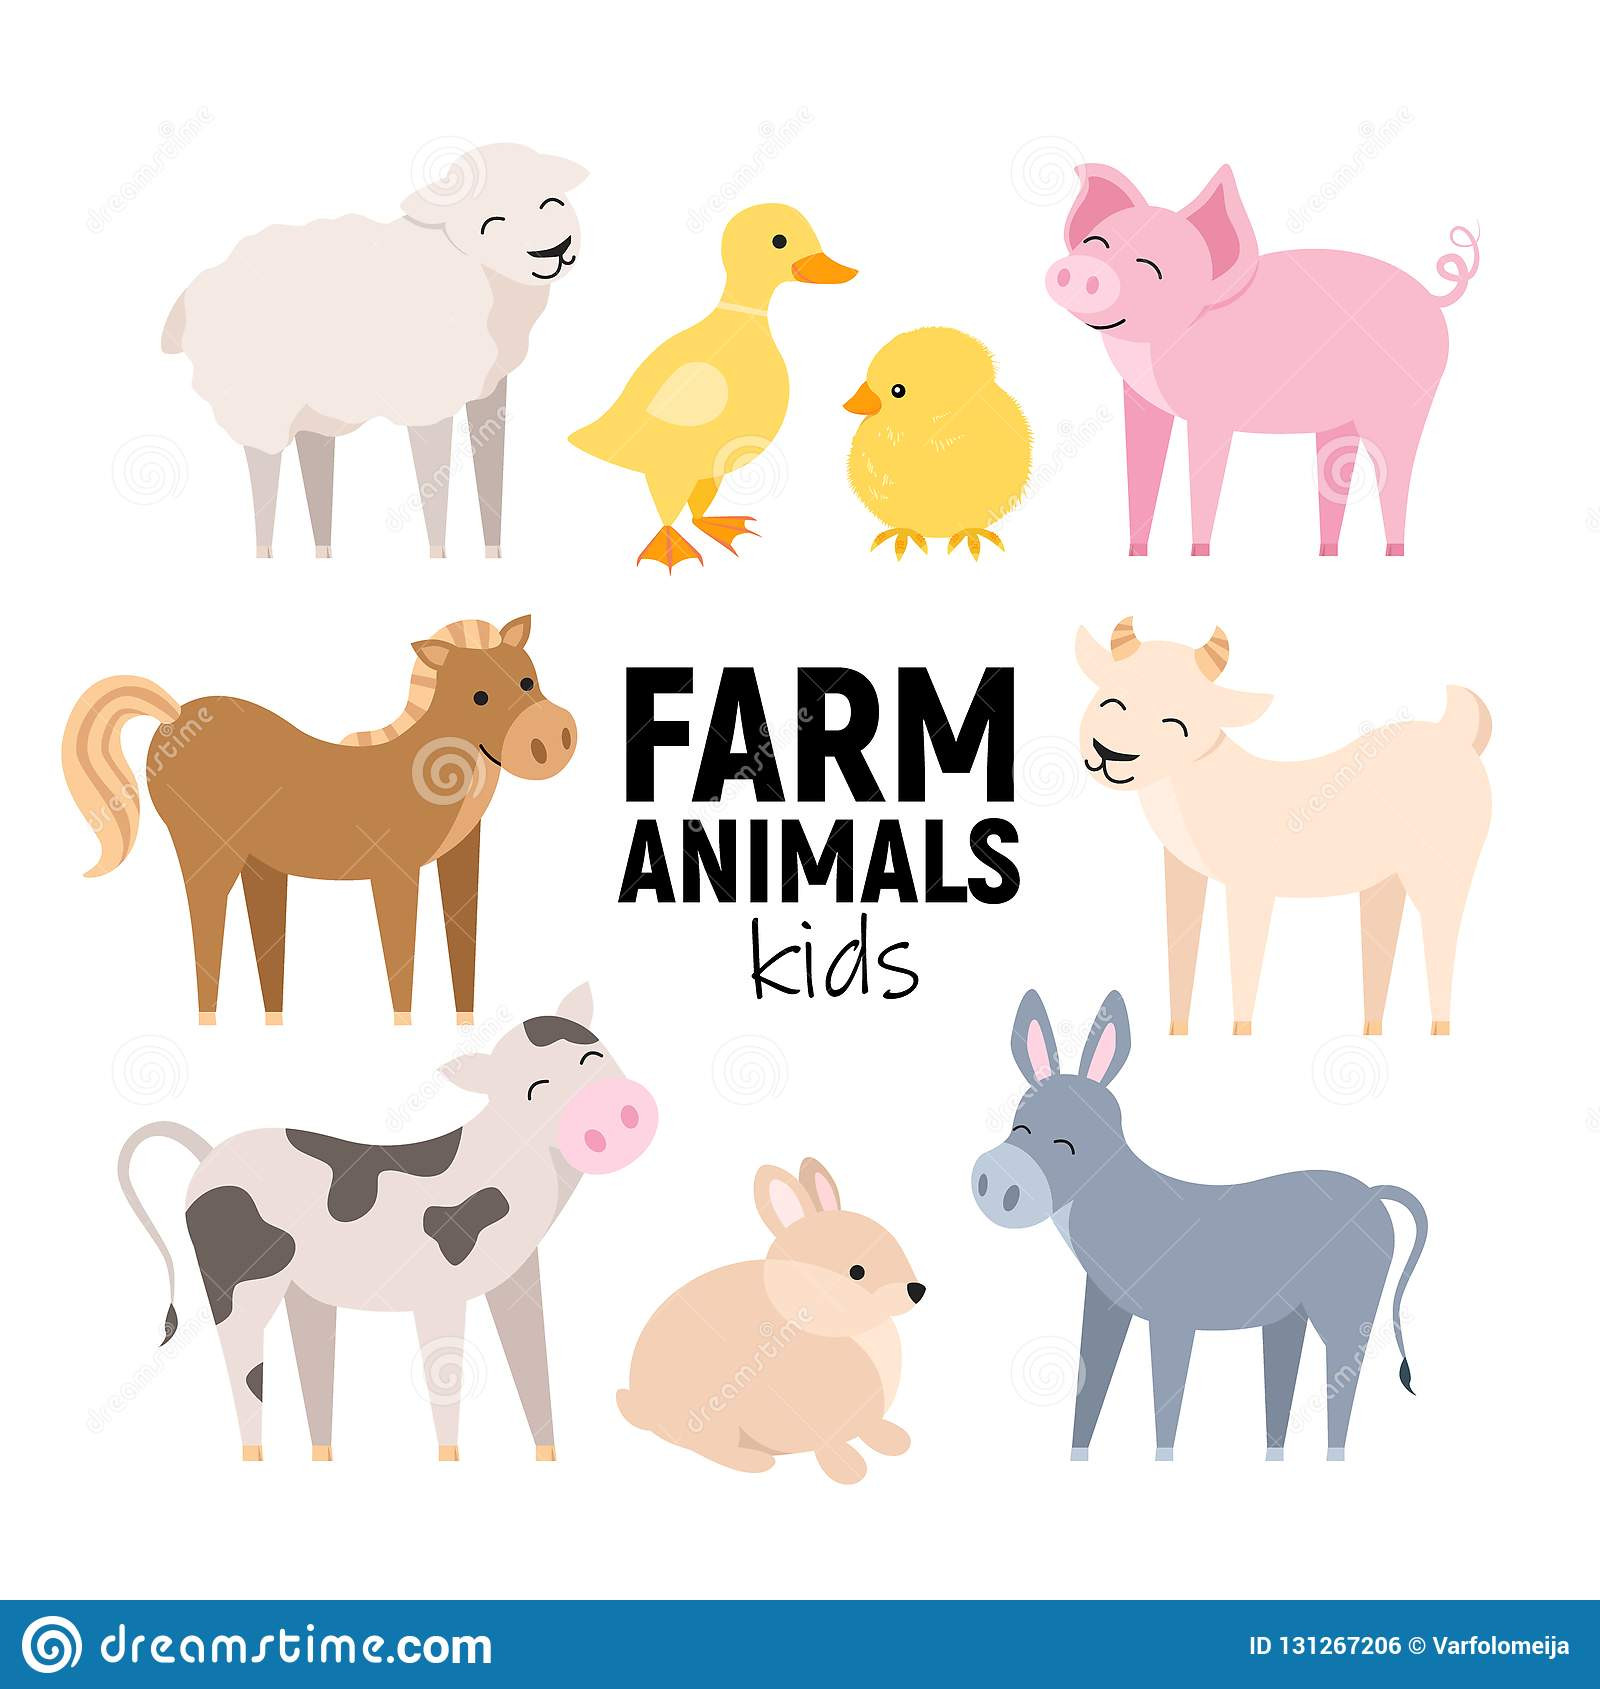 Animated Farm Animals for Kids